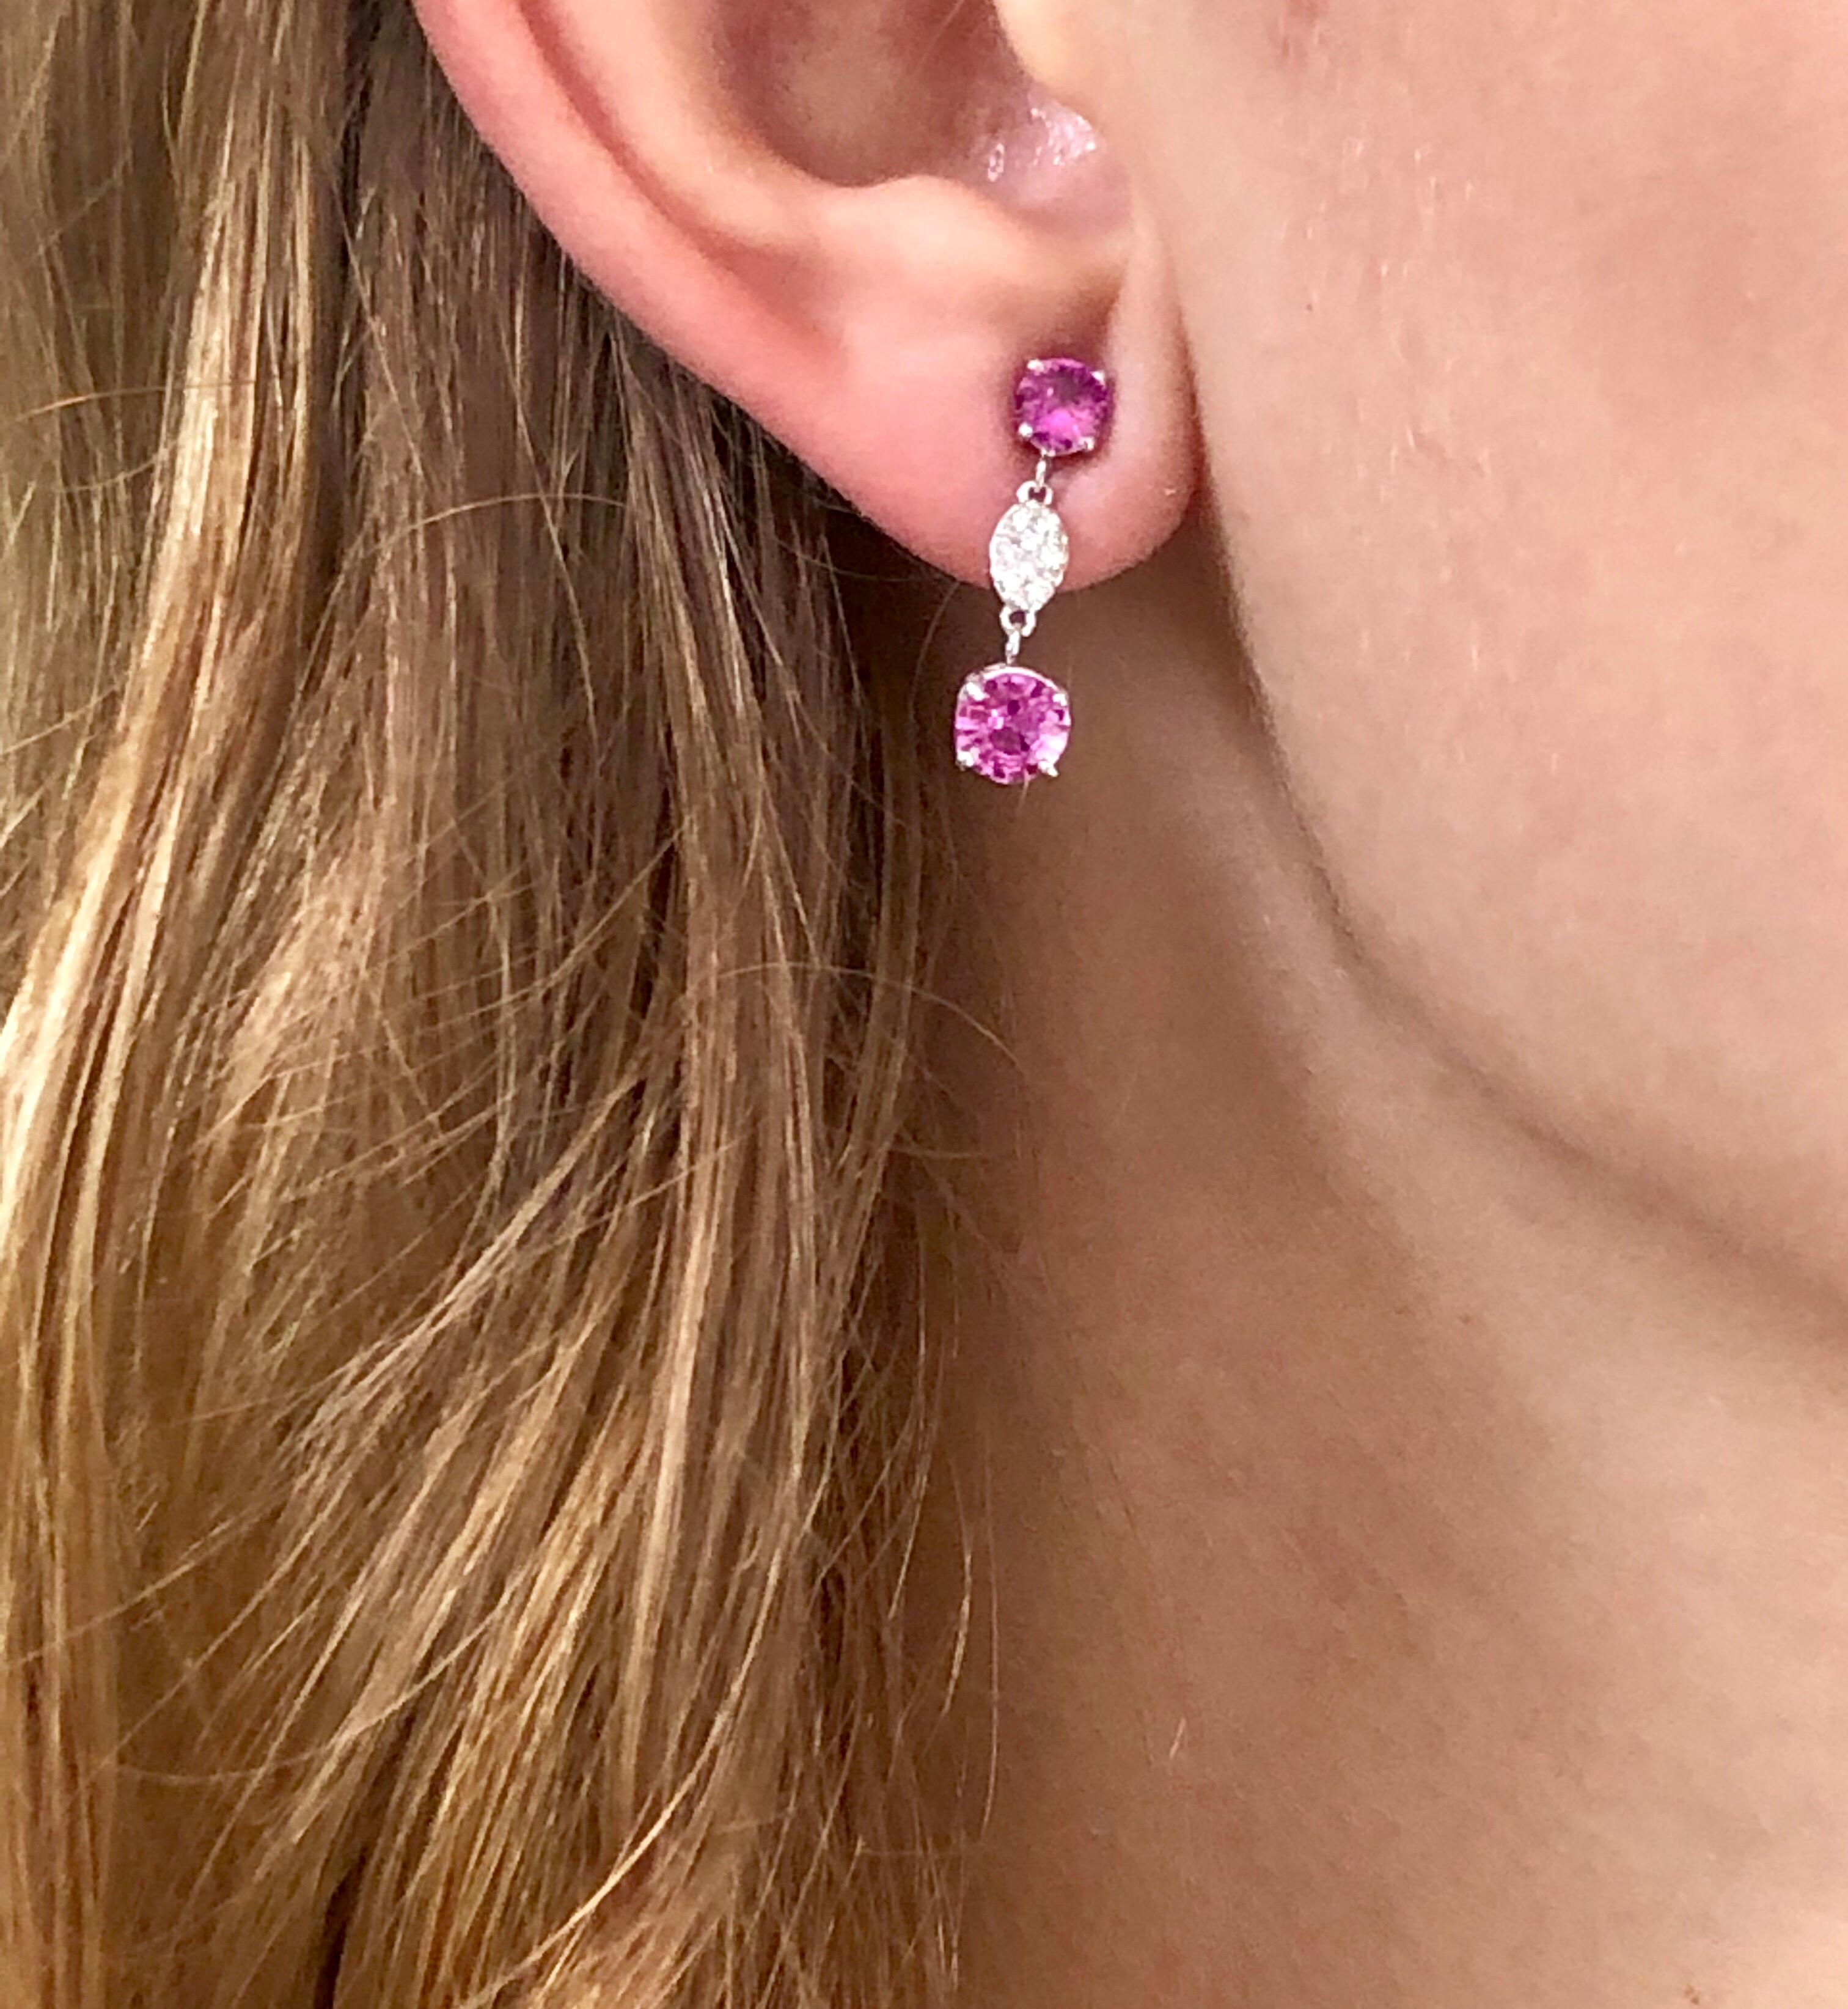 Fourteen karat white gold diamond and pink sapphire earrings one inch long
Four pink Sapphire Weighing 2.10 carats 
Four  intense vivid pink matched sapphires
Diamonds weighing 0.22 carat
New Earrings
Gold earrings are hanging off a post and with